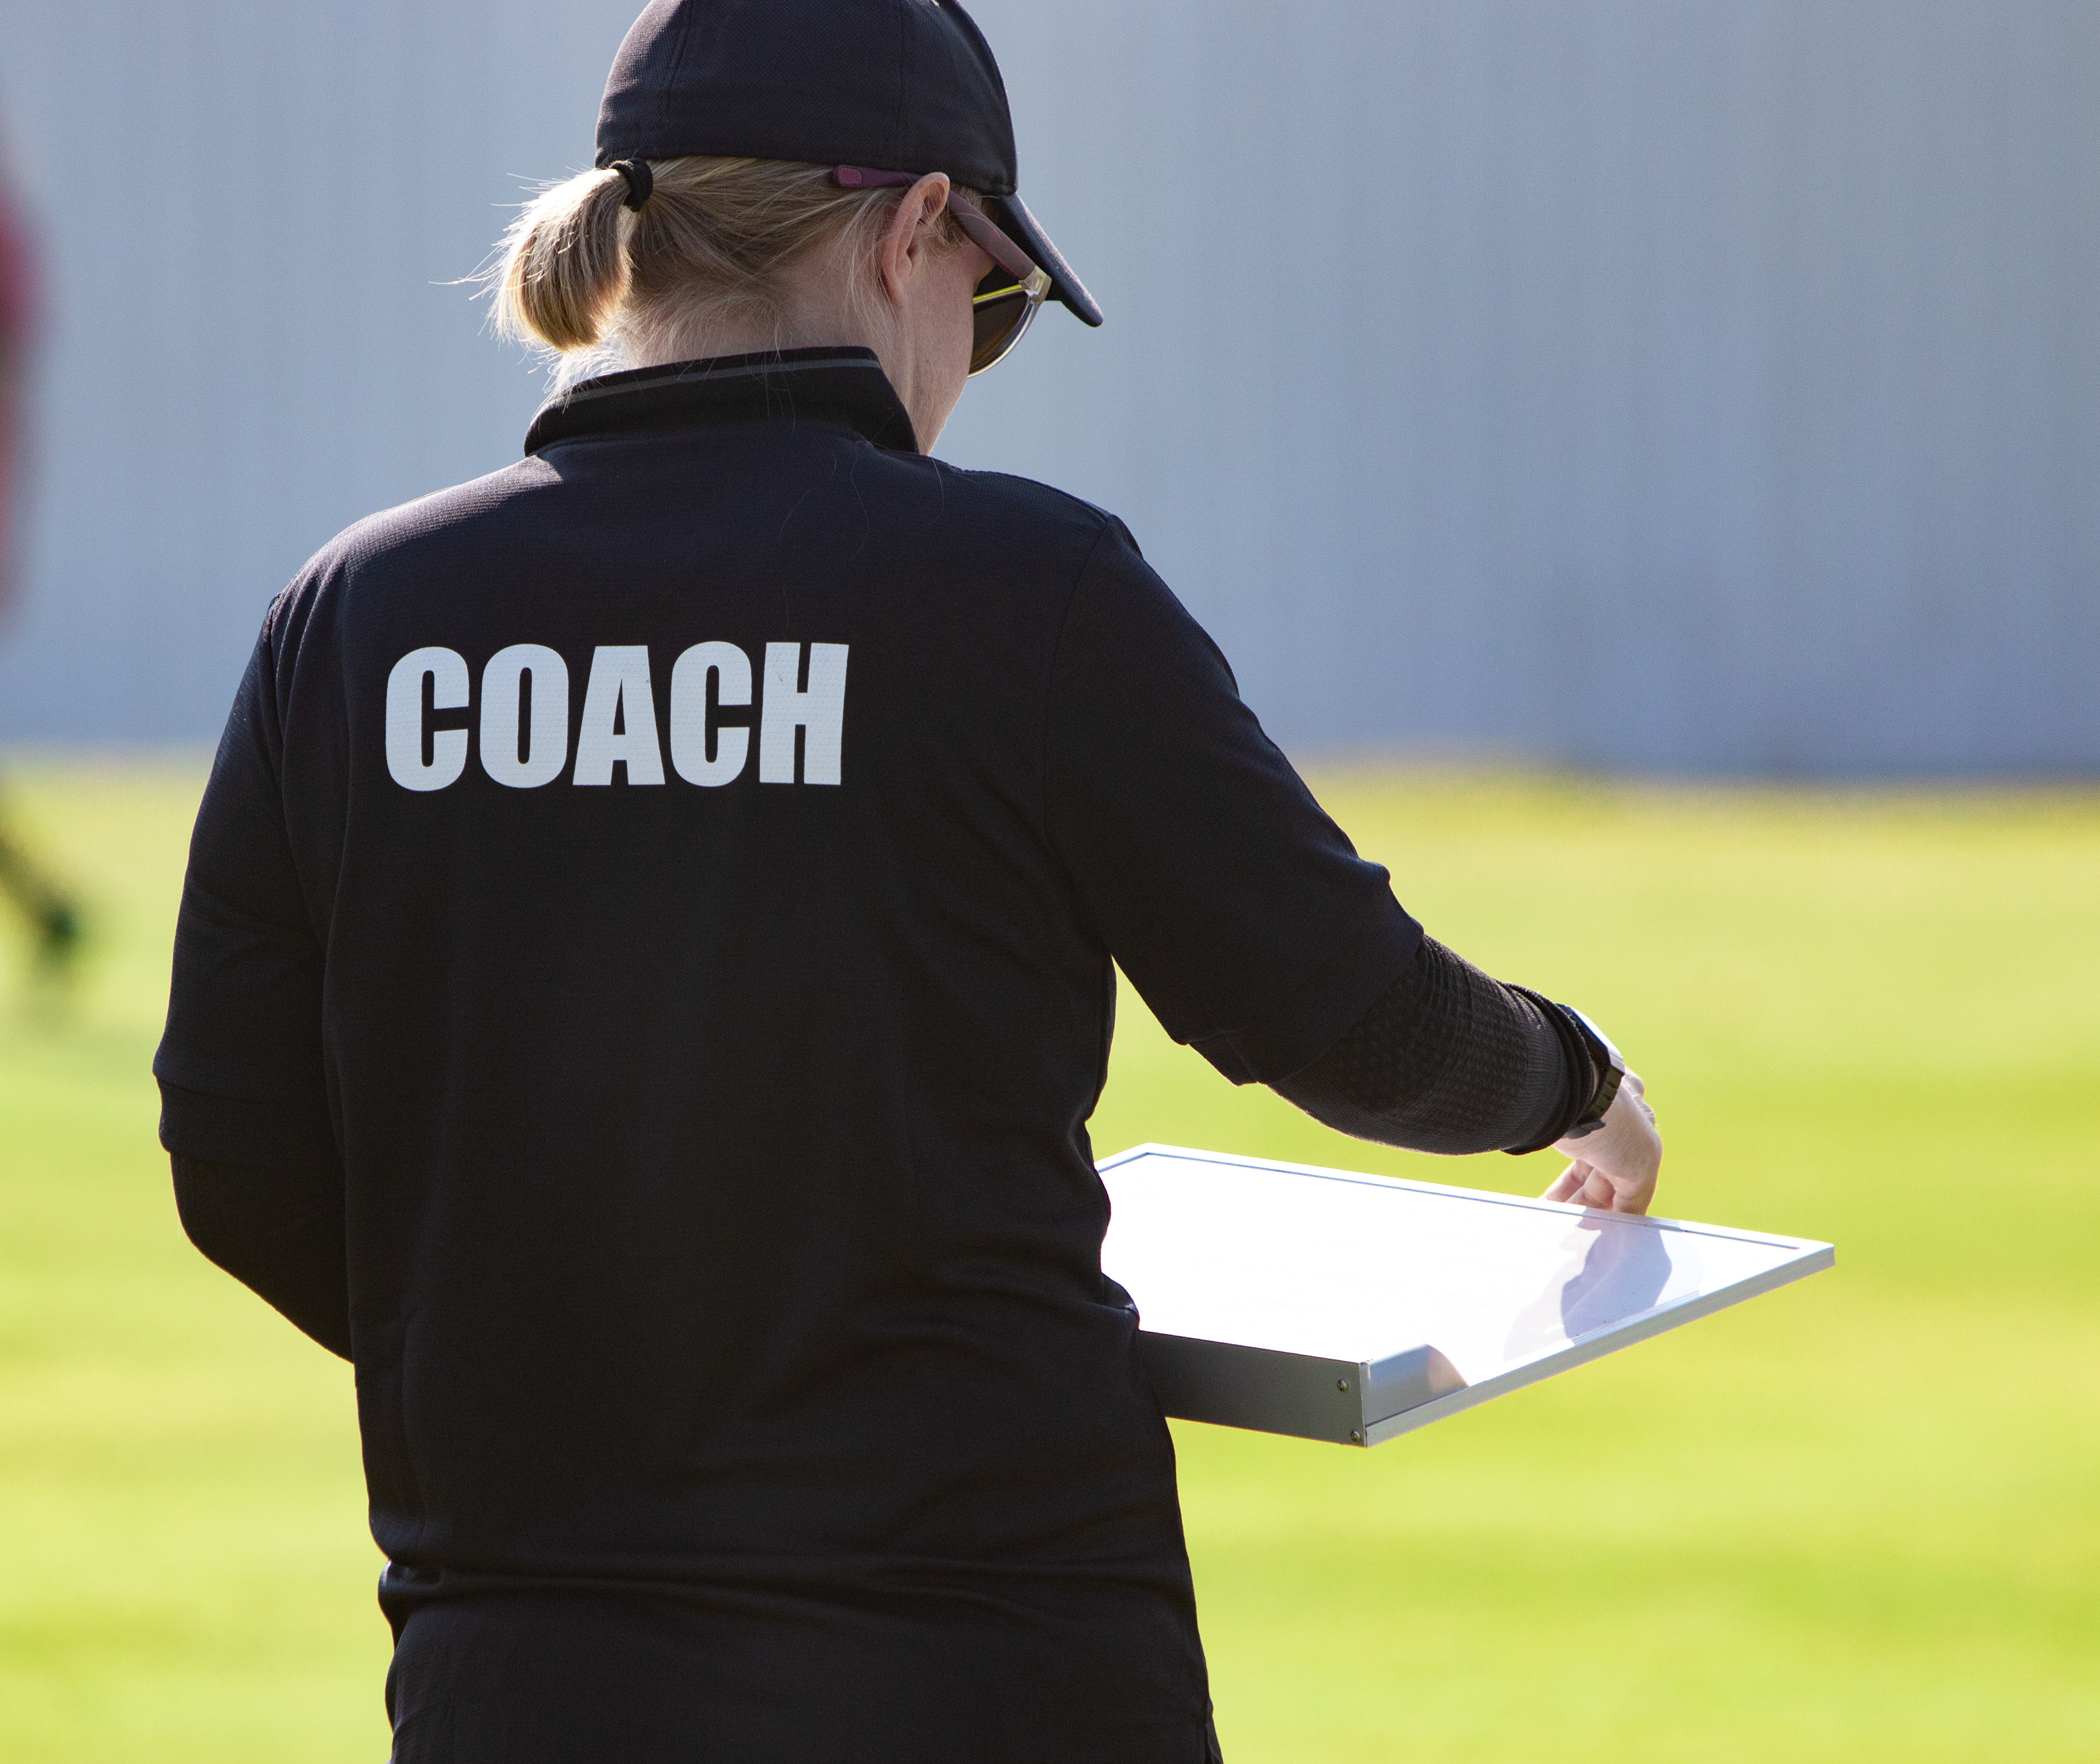 A Coach for All